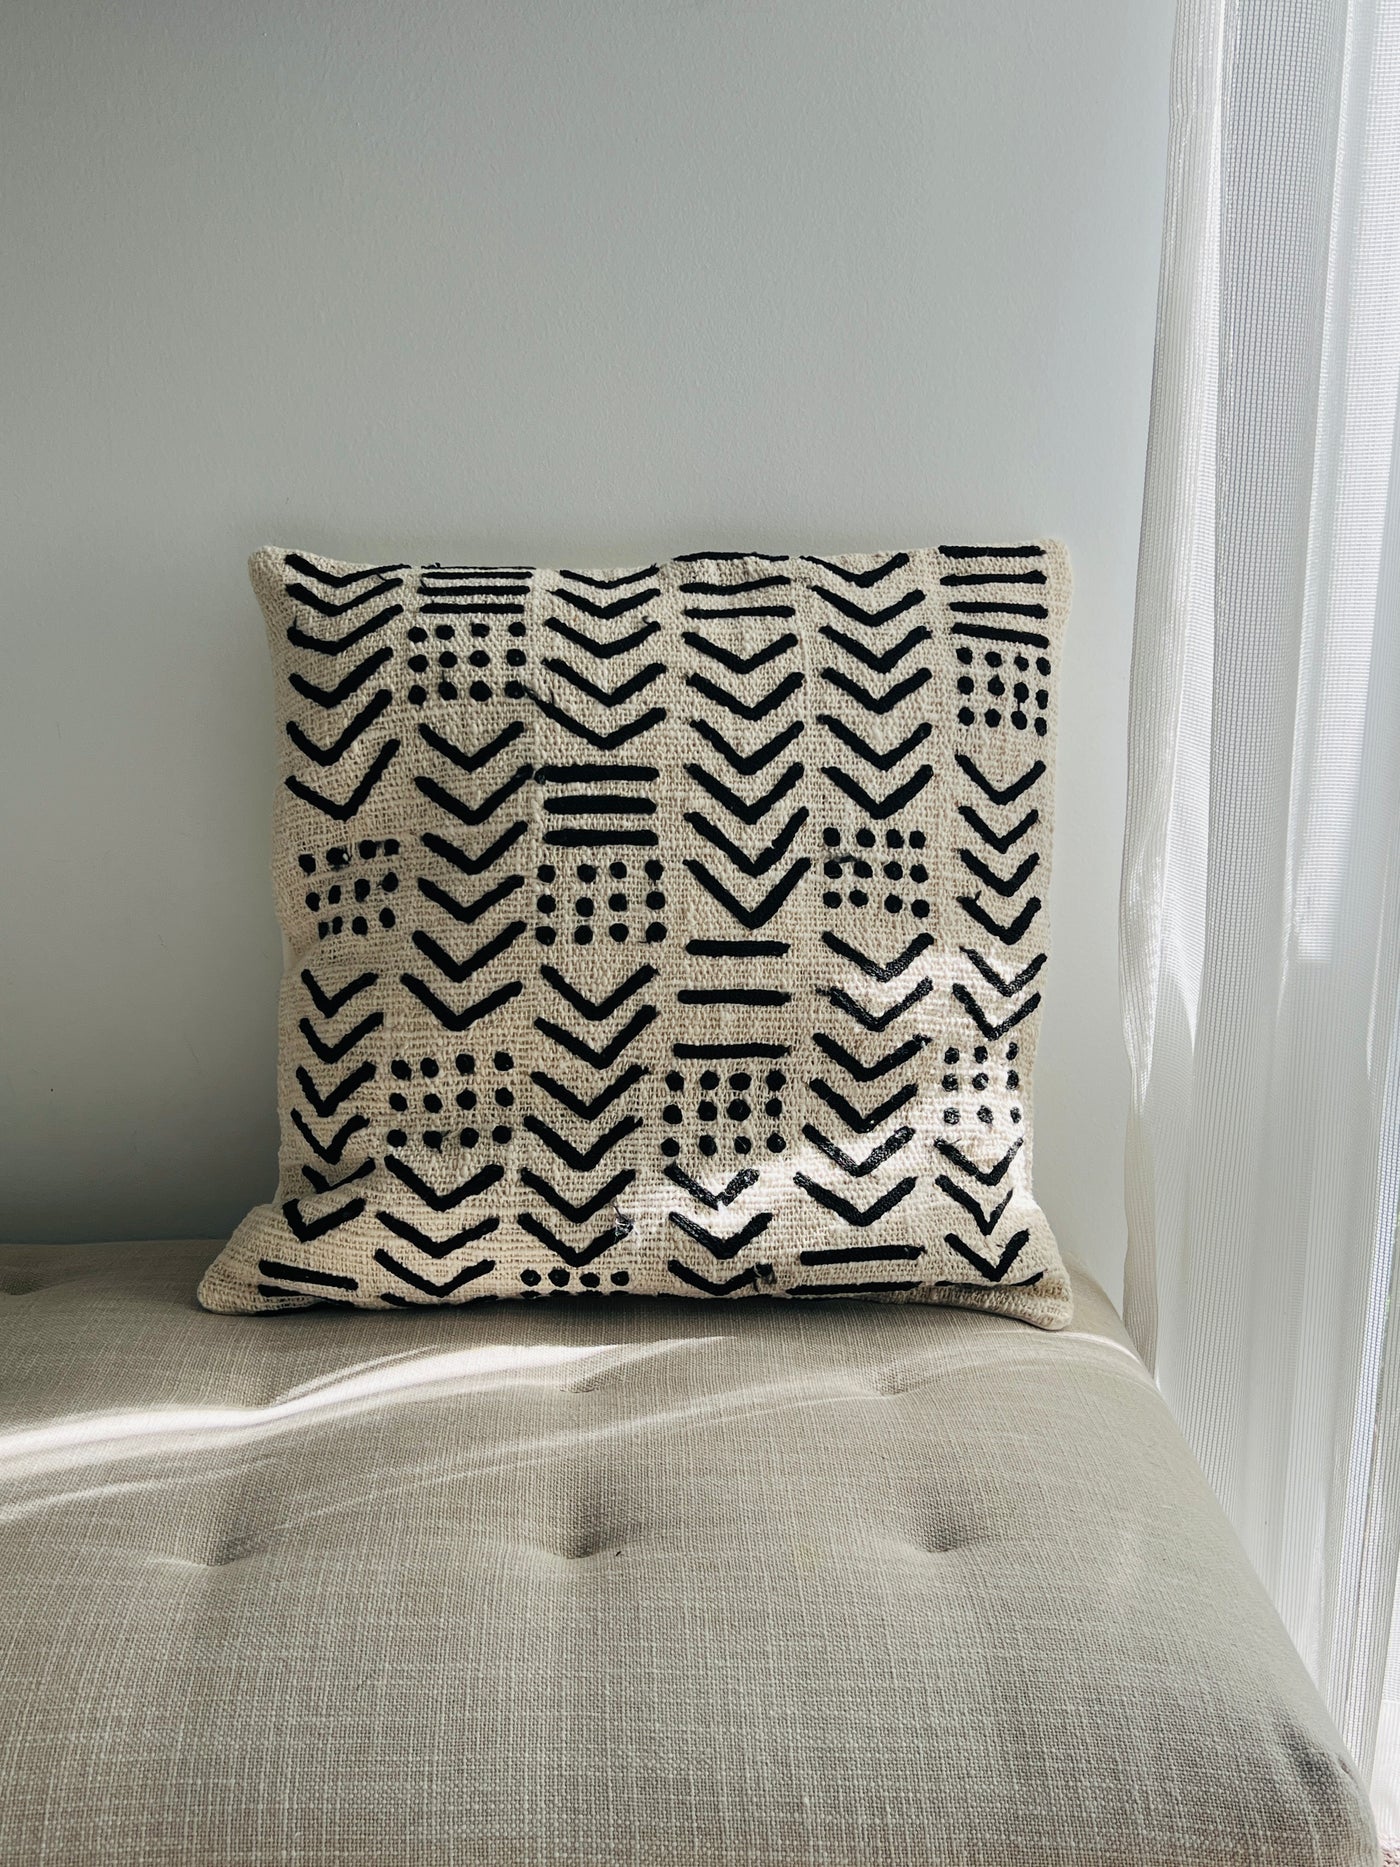 Hand made cotton aztec cushions.